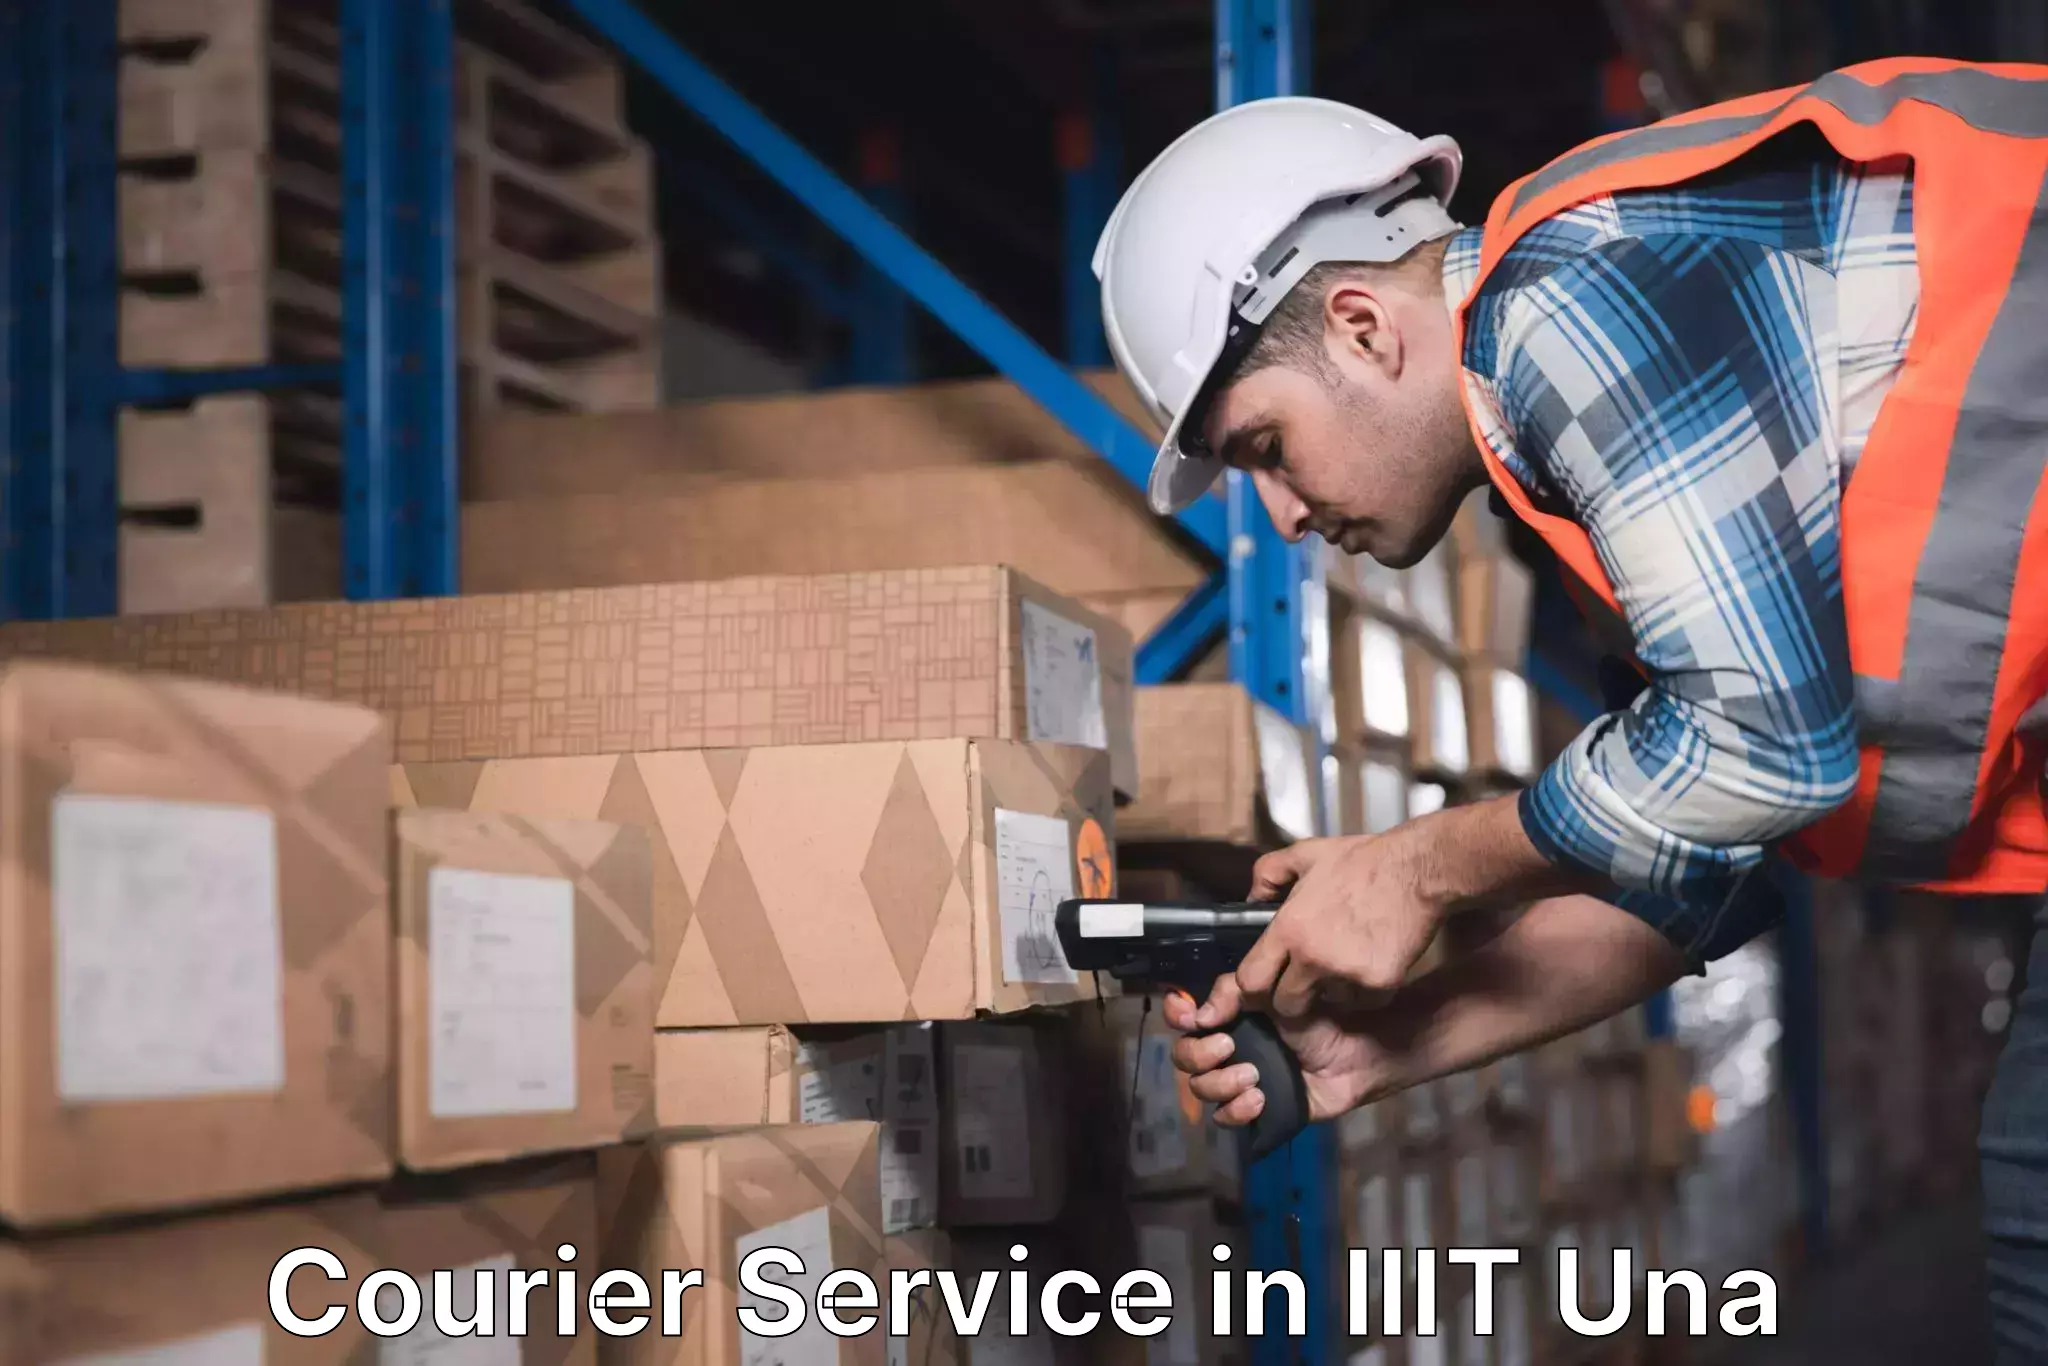 Nationwide delivery network in IIIT Una